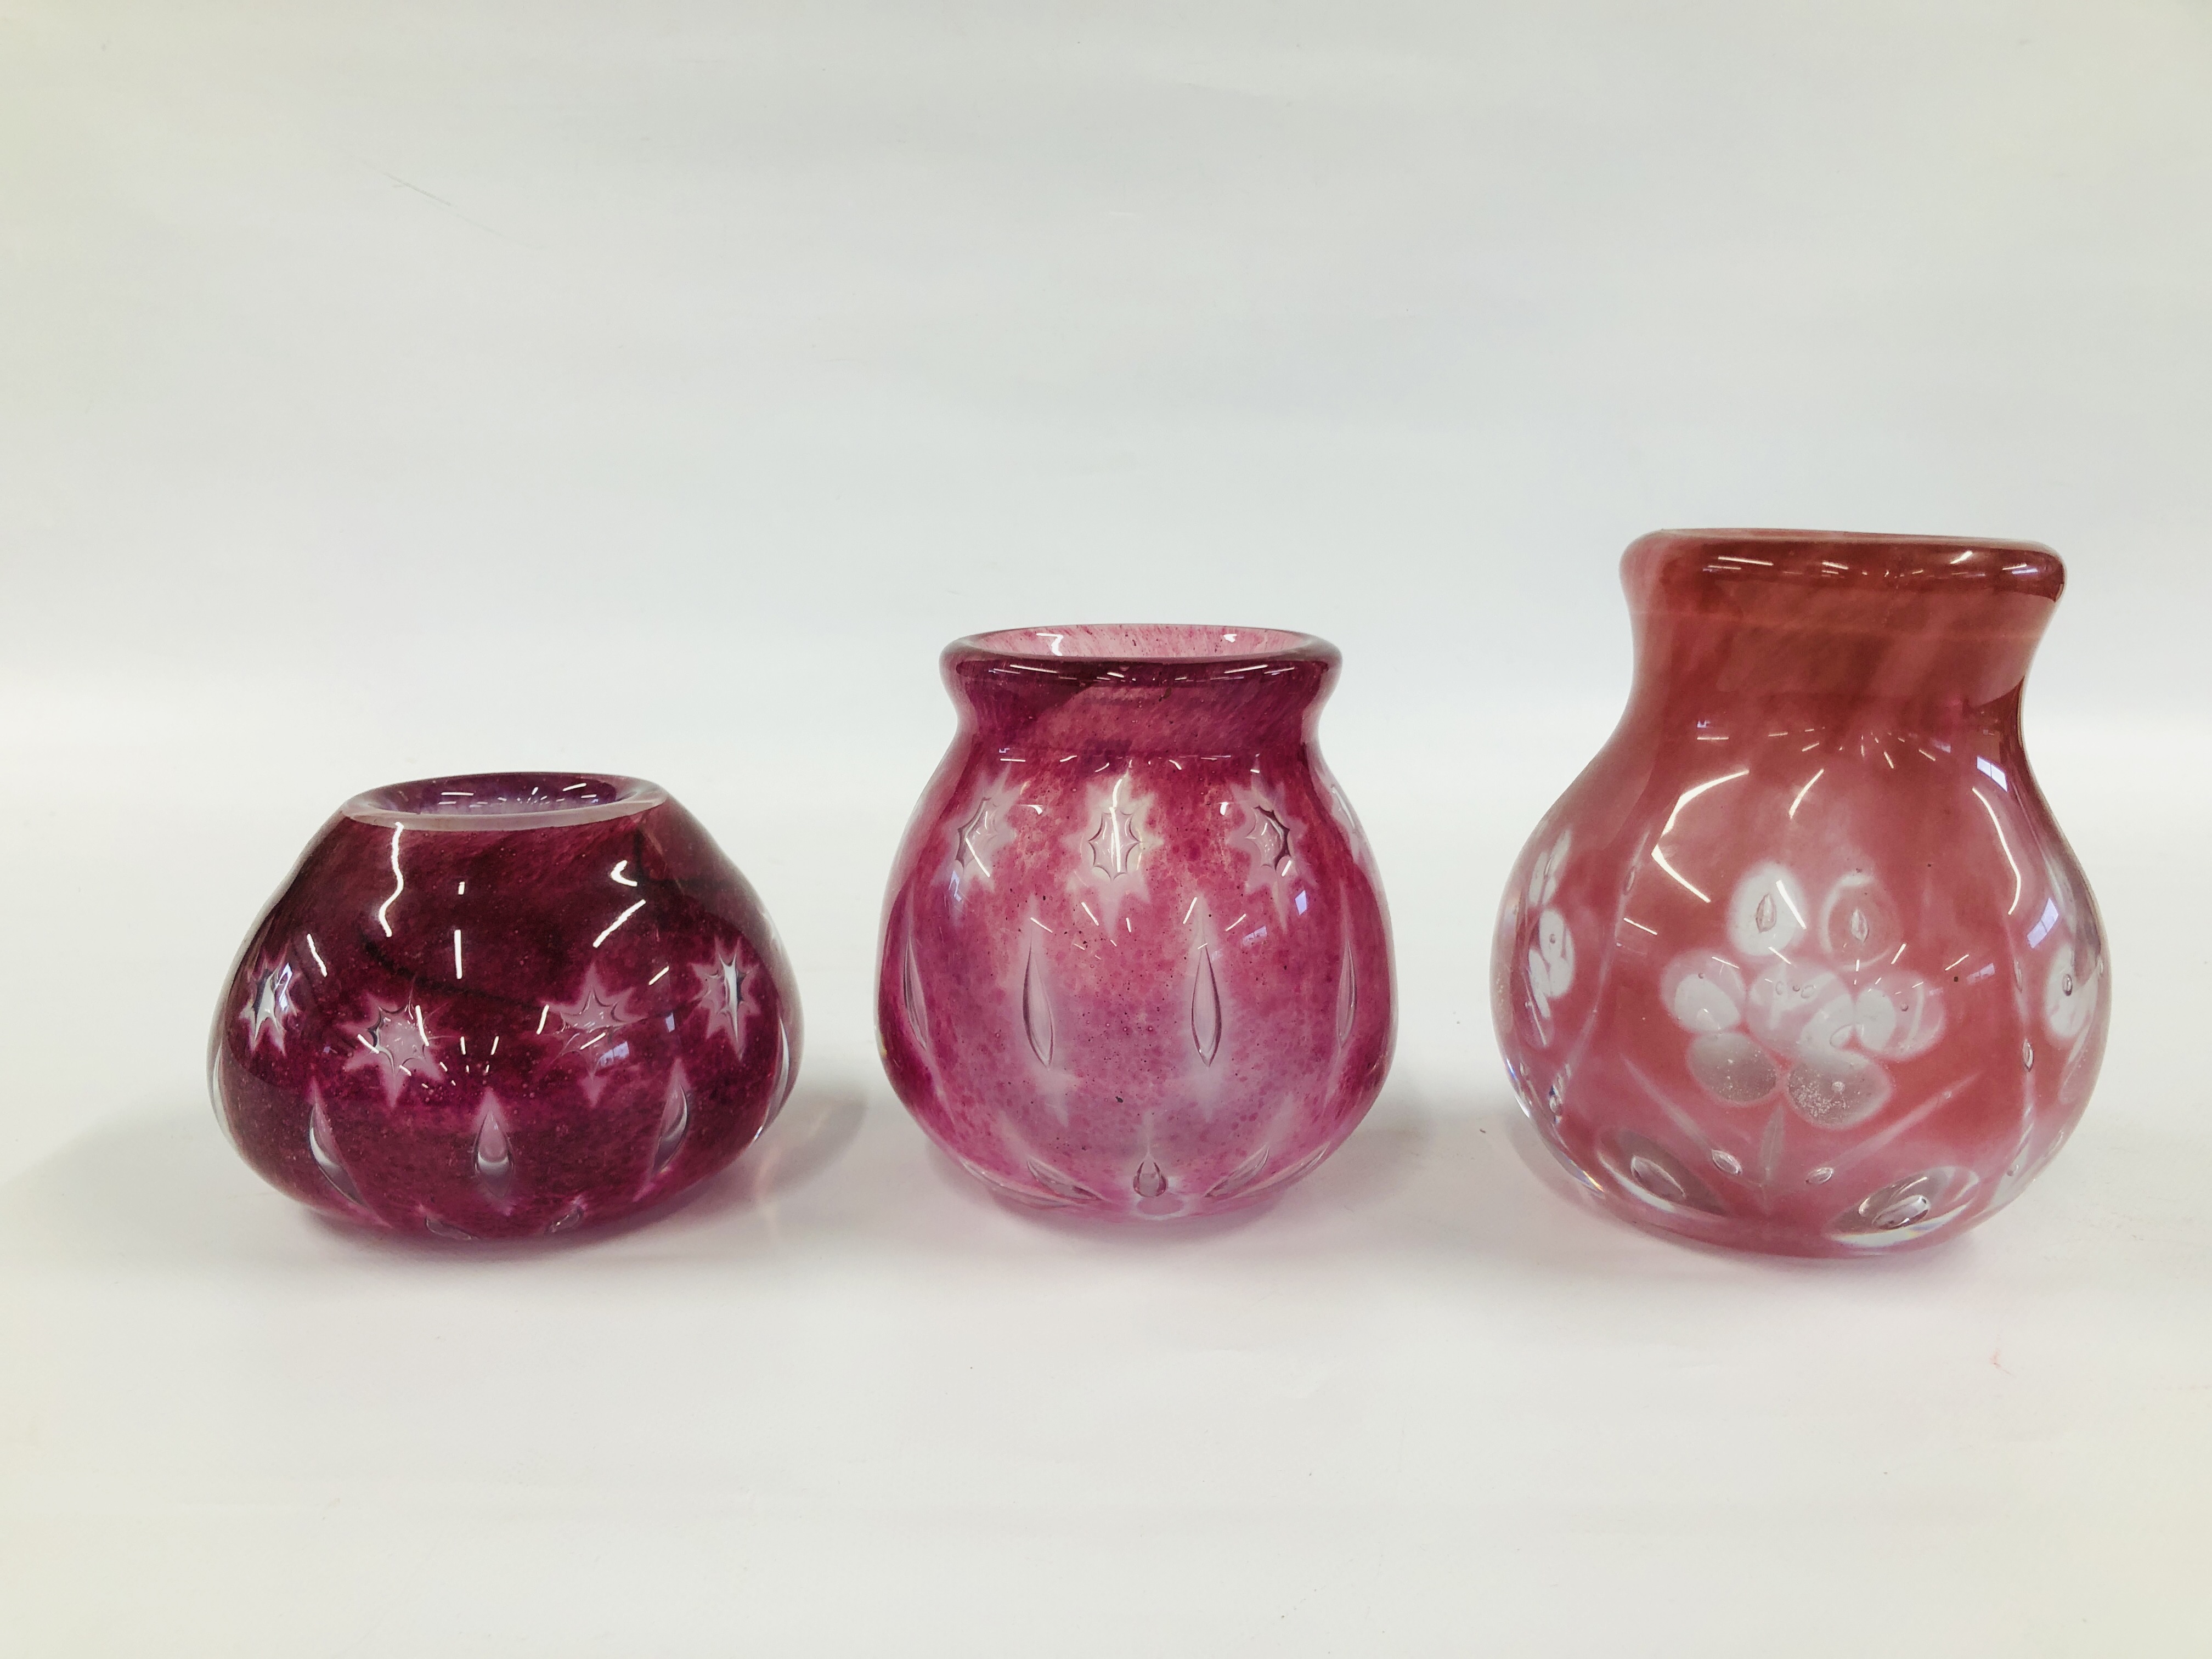 THREE PALE PINK STUDIO GLASS VASES WITH AIR TRAPPED DECORATION DESIGNED BY RSW.